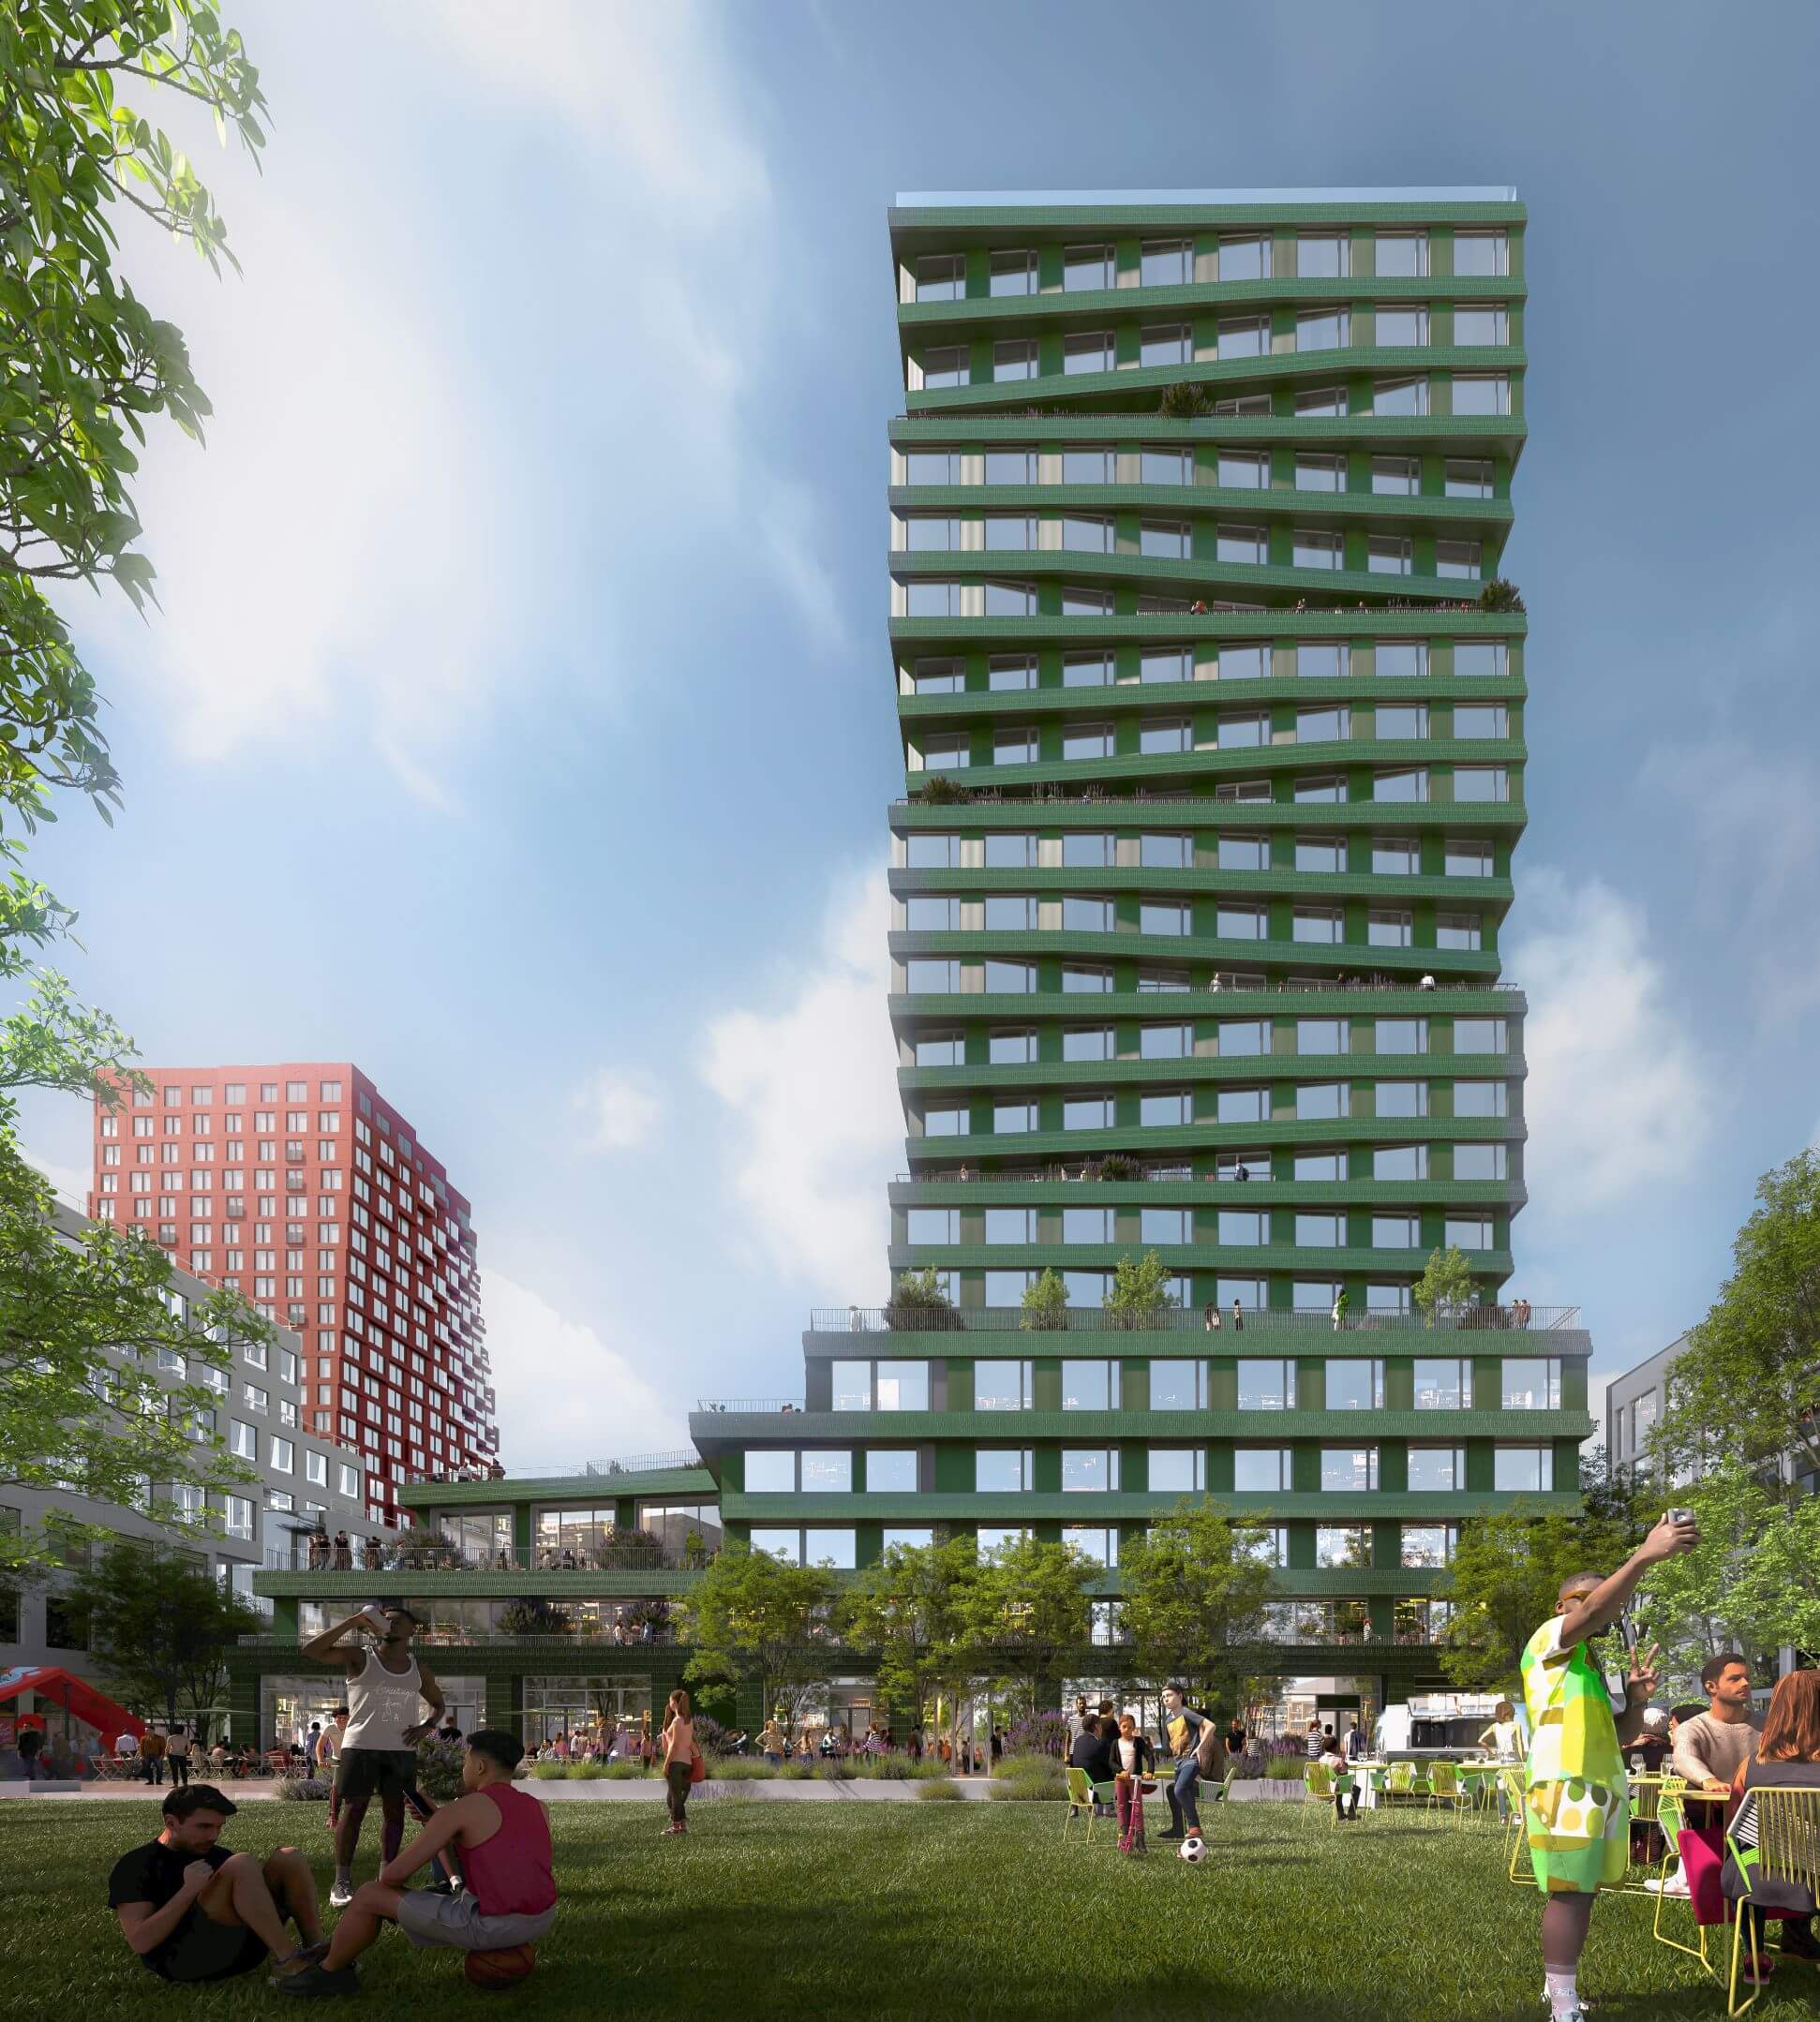 rendering of a green tile-clad apartment tower with a park in the foreground